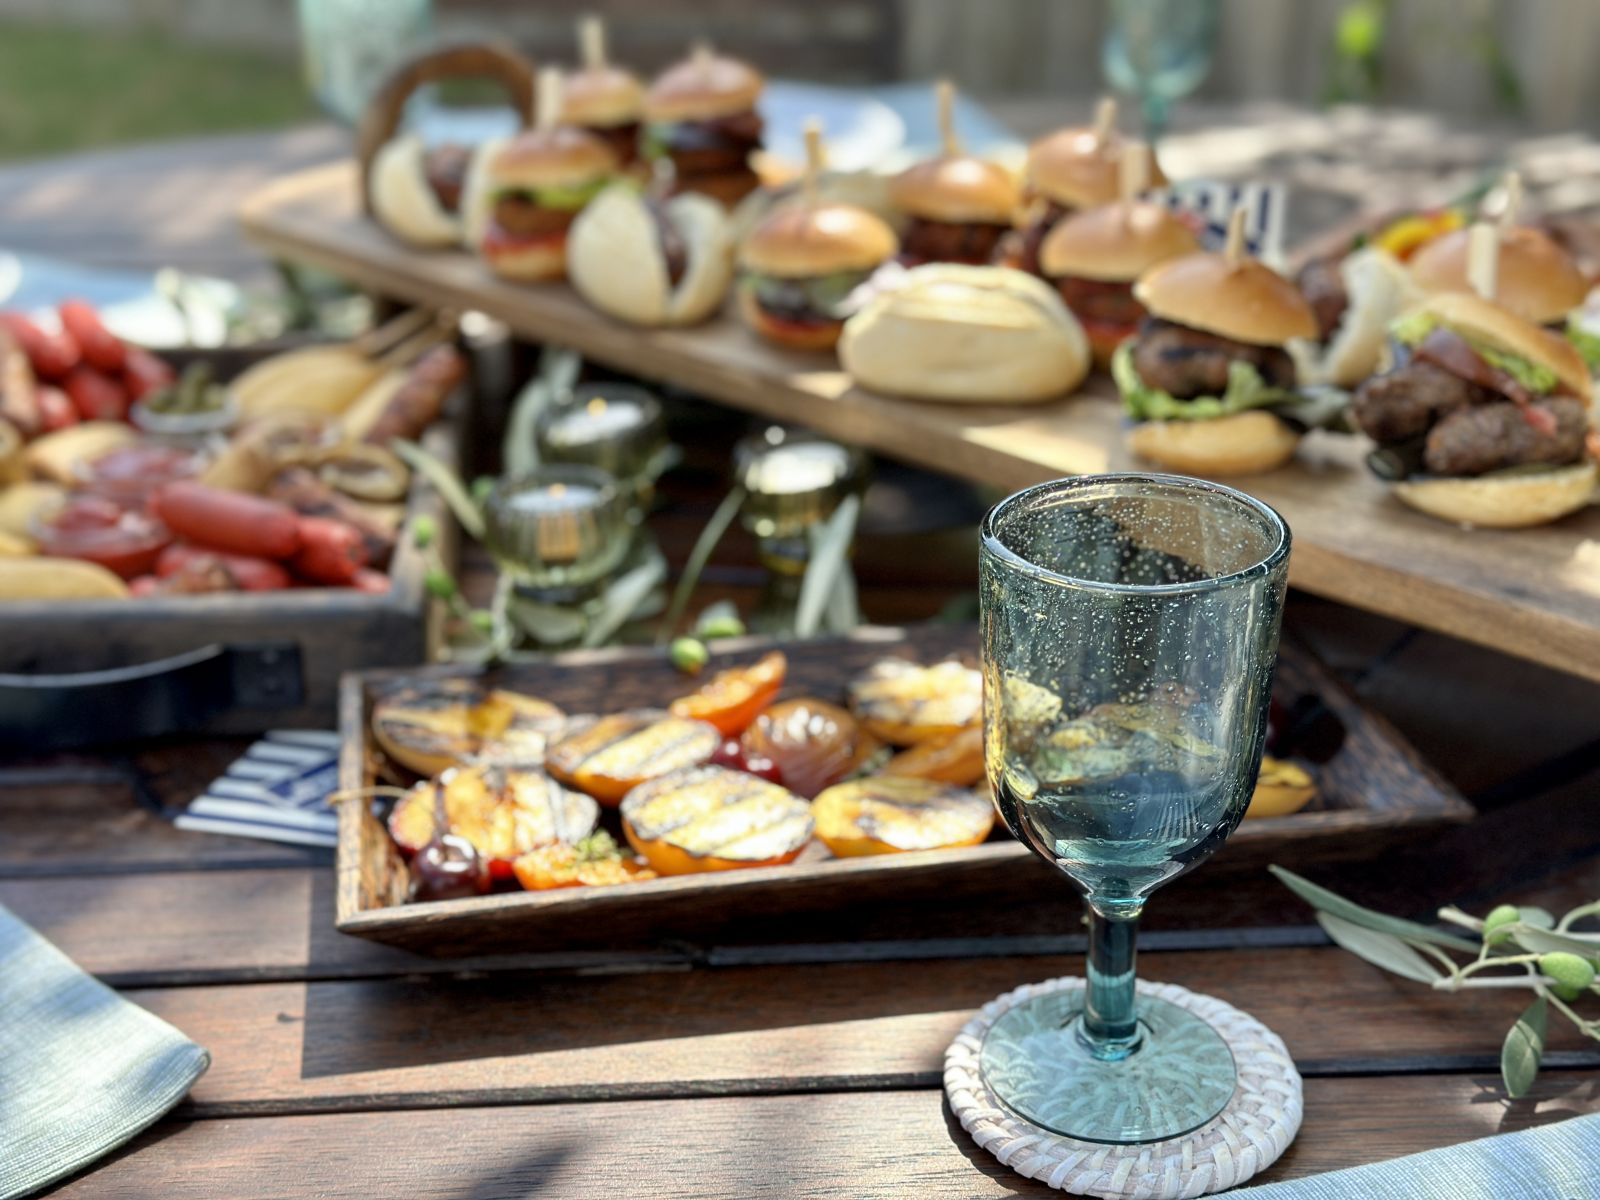 An outdoor table with nibbles